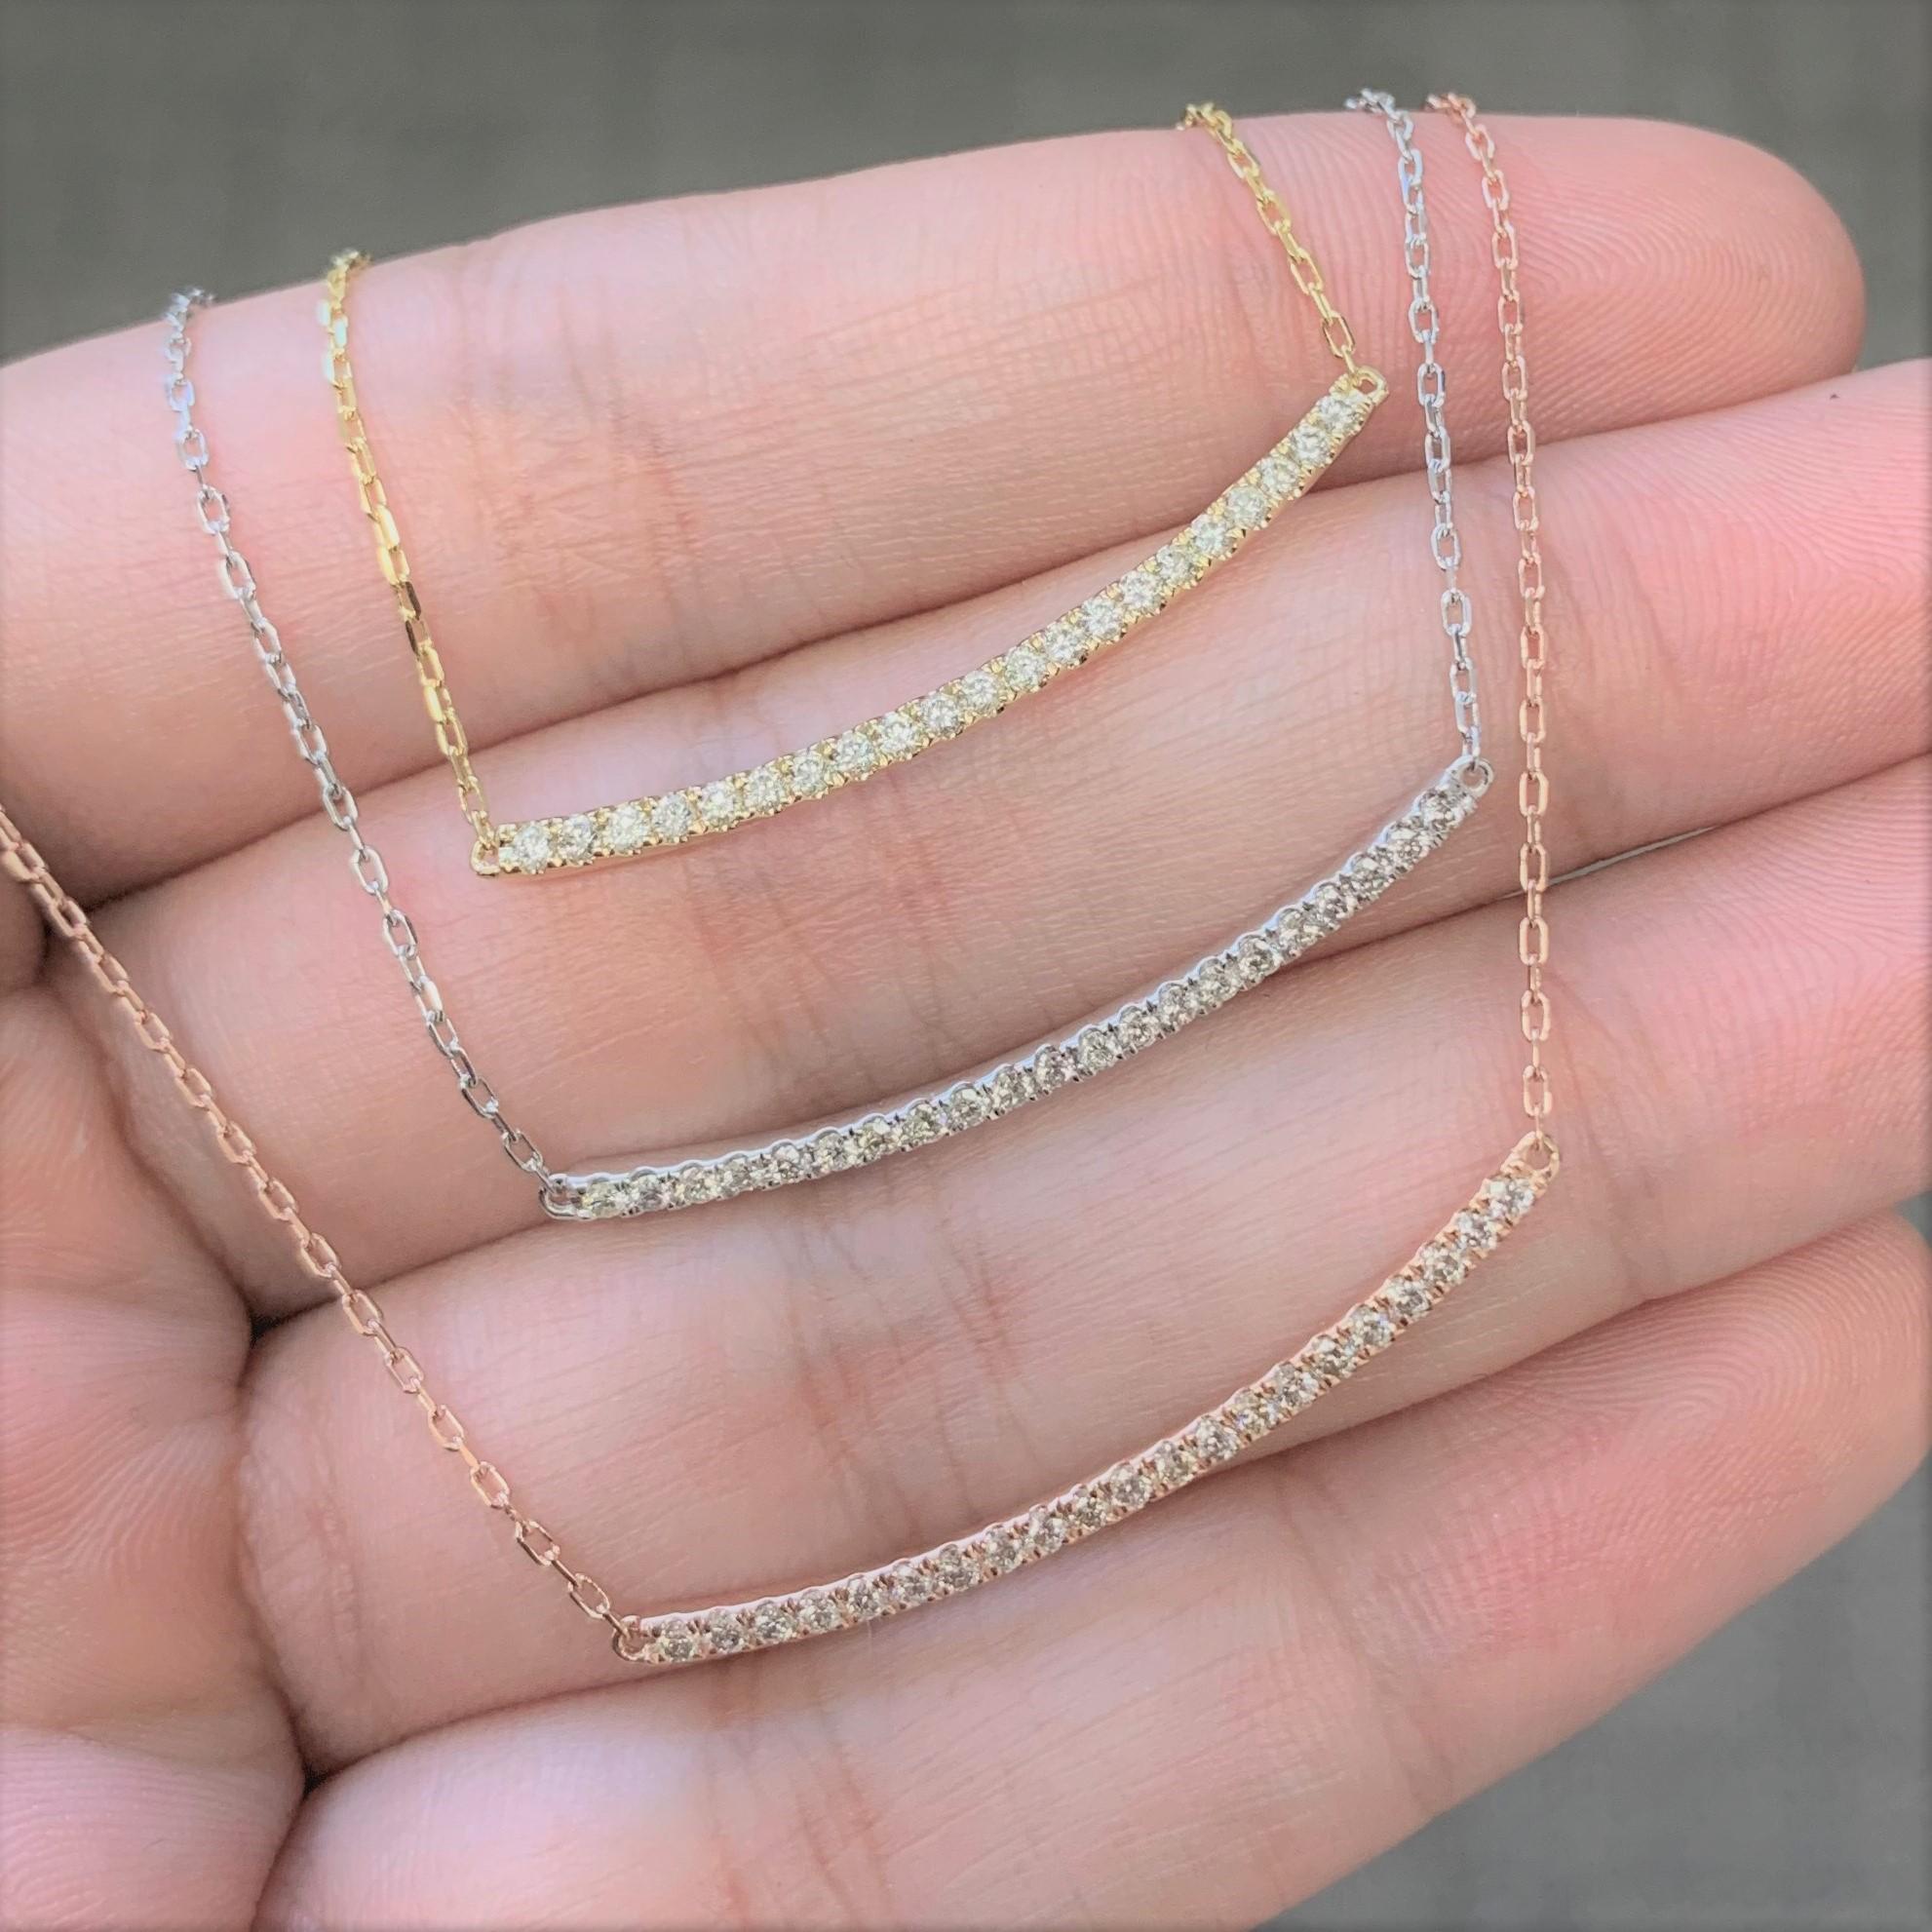 A beautiful and classic 14k Gold Diamond Bar Necklace featuring 0.26ct of round sparkling natural Diamonds. Diamond Color and Clarity is GH SI1-SI2. Chain measures 16